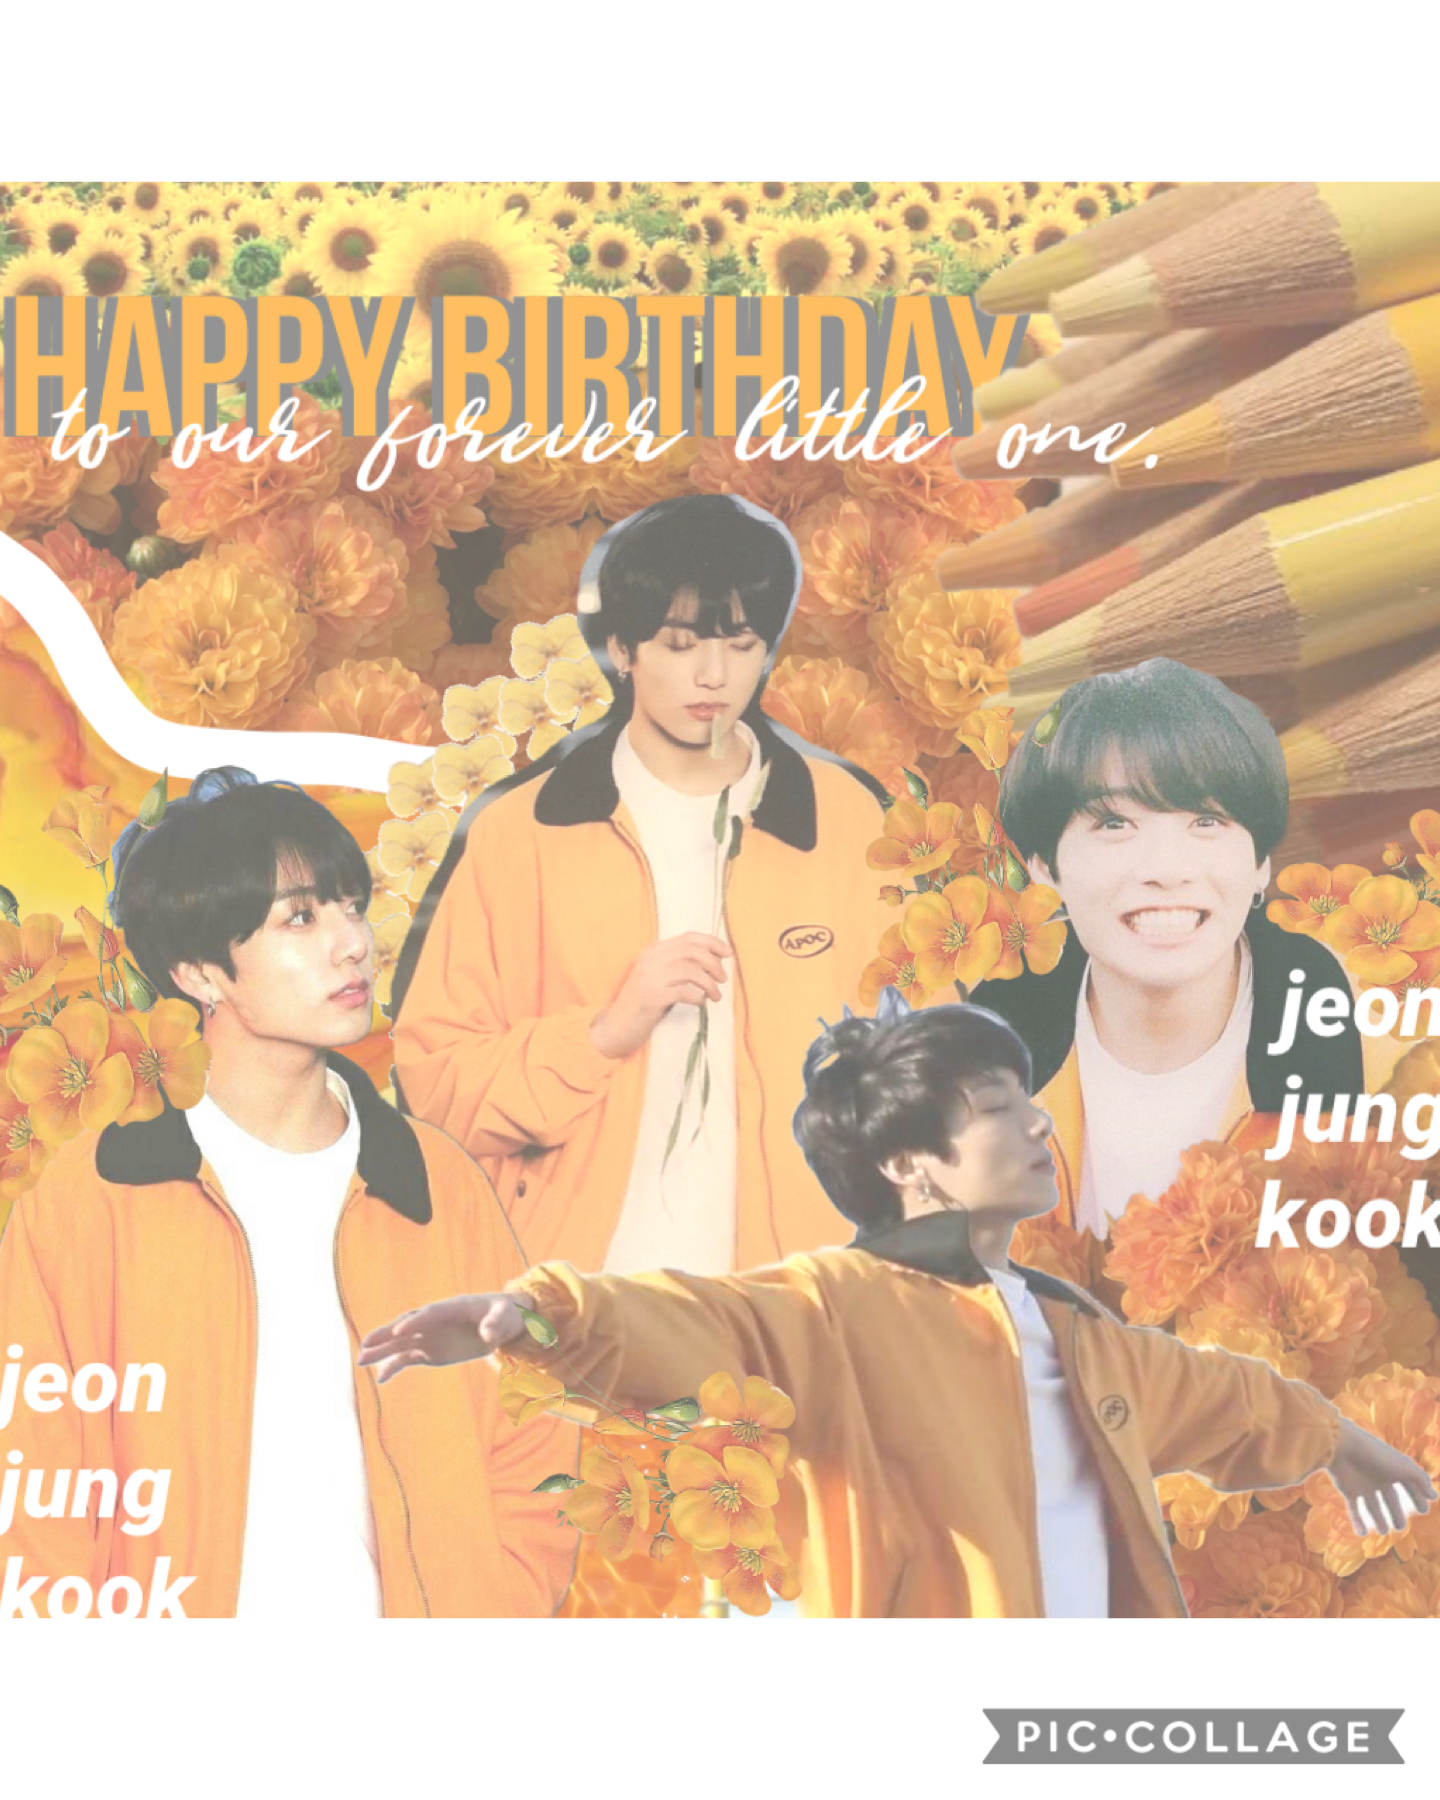 ||🥕|| JEON JUNGKOOK ||🥕||

happy bday bb 🥺 ; i refuse to believe he’s 23, no, he’s still a lil toddler ; this is the sweetest, most loving & most thoughtful human ever, and i love him w/ my entire heart :( ; ilyasm! — august